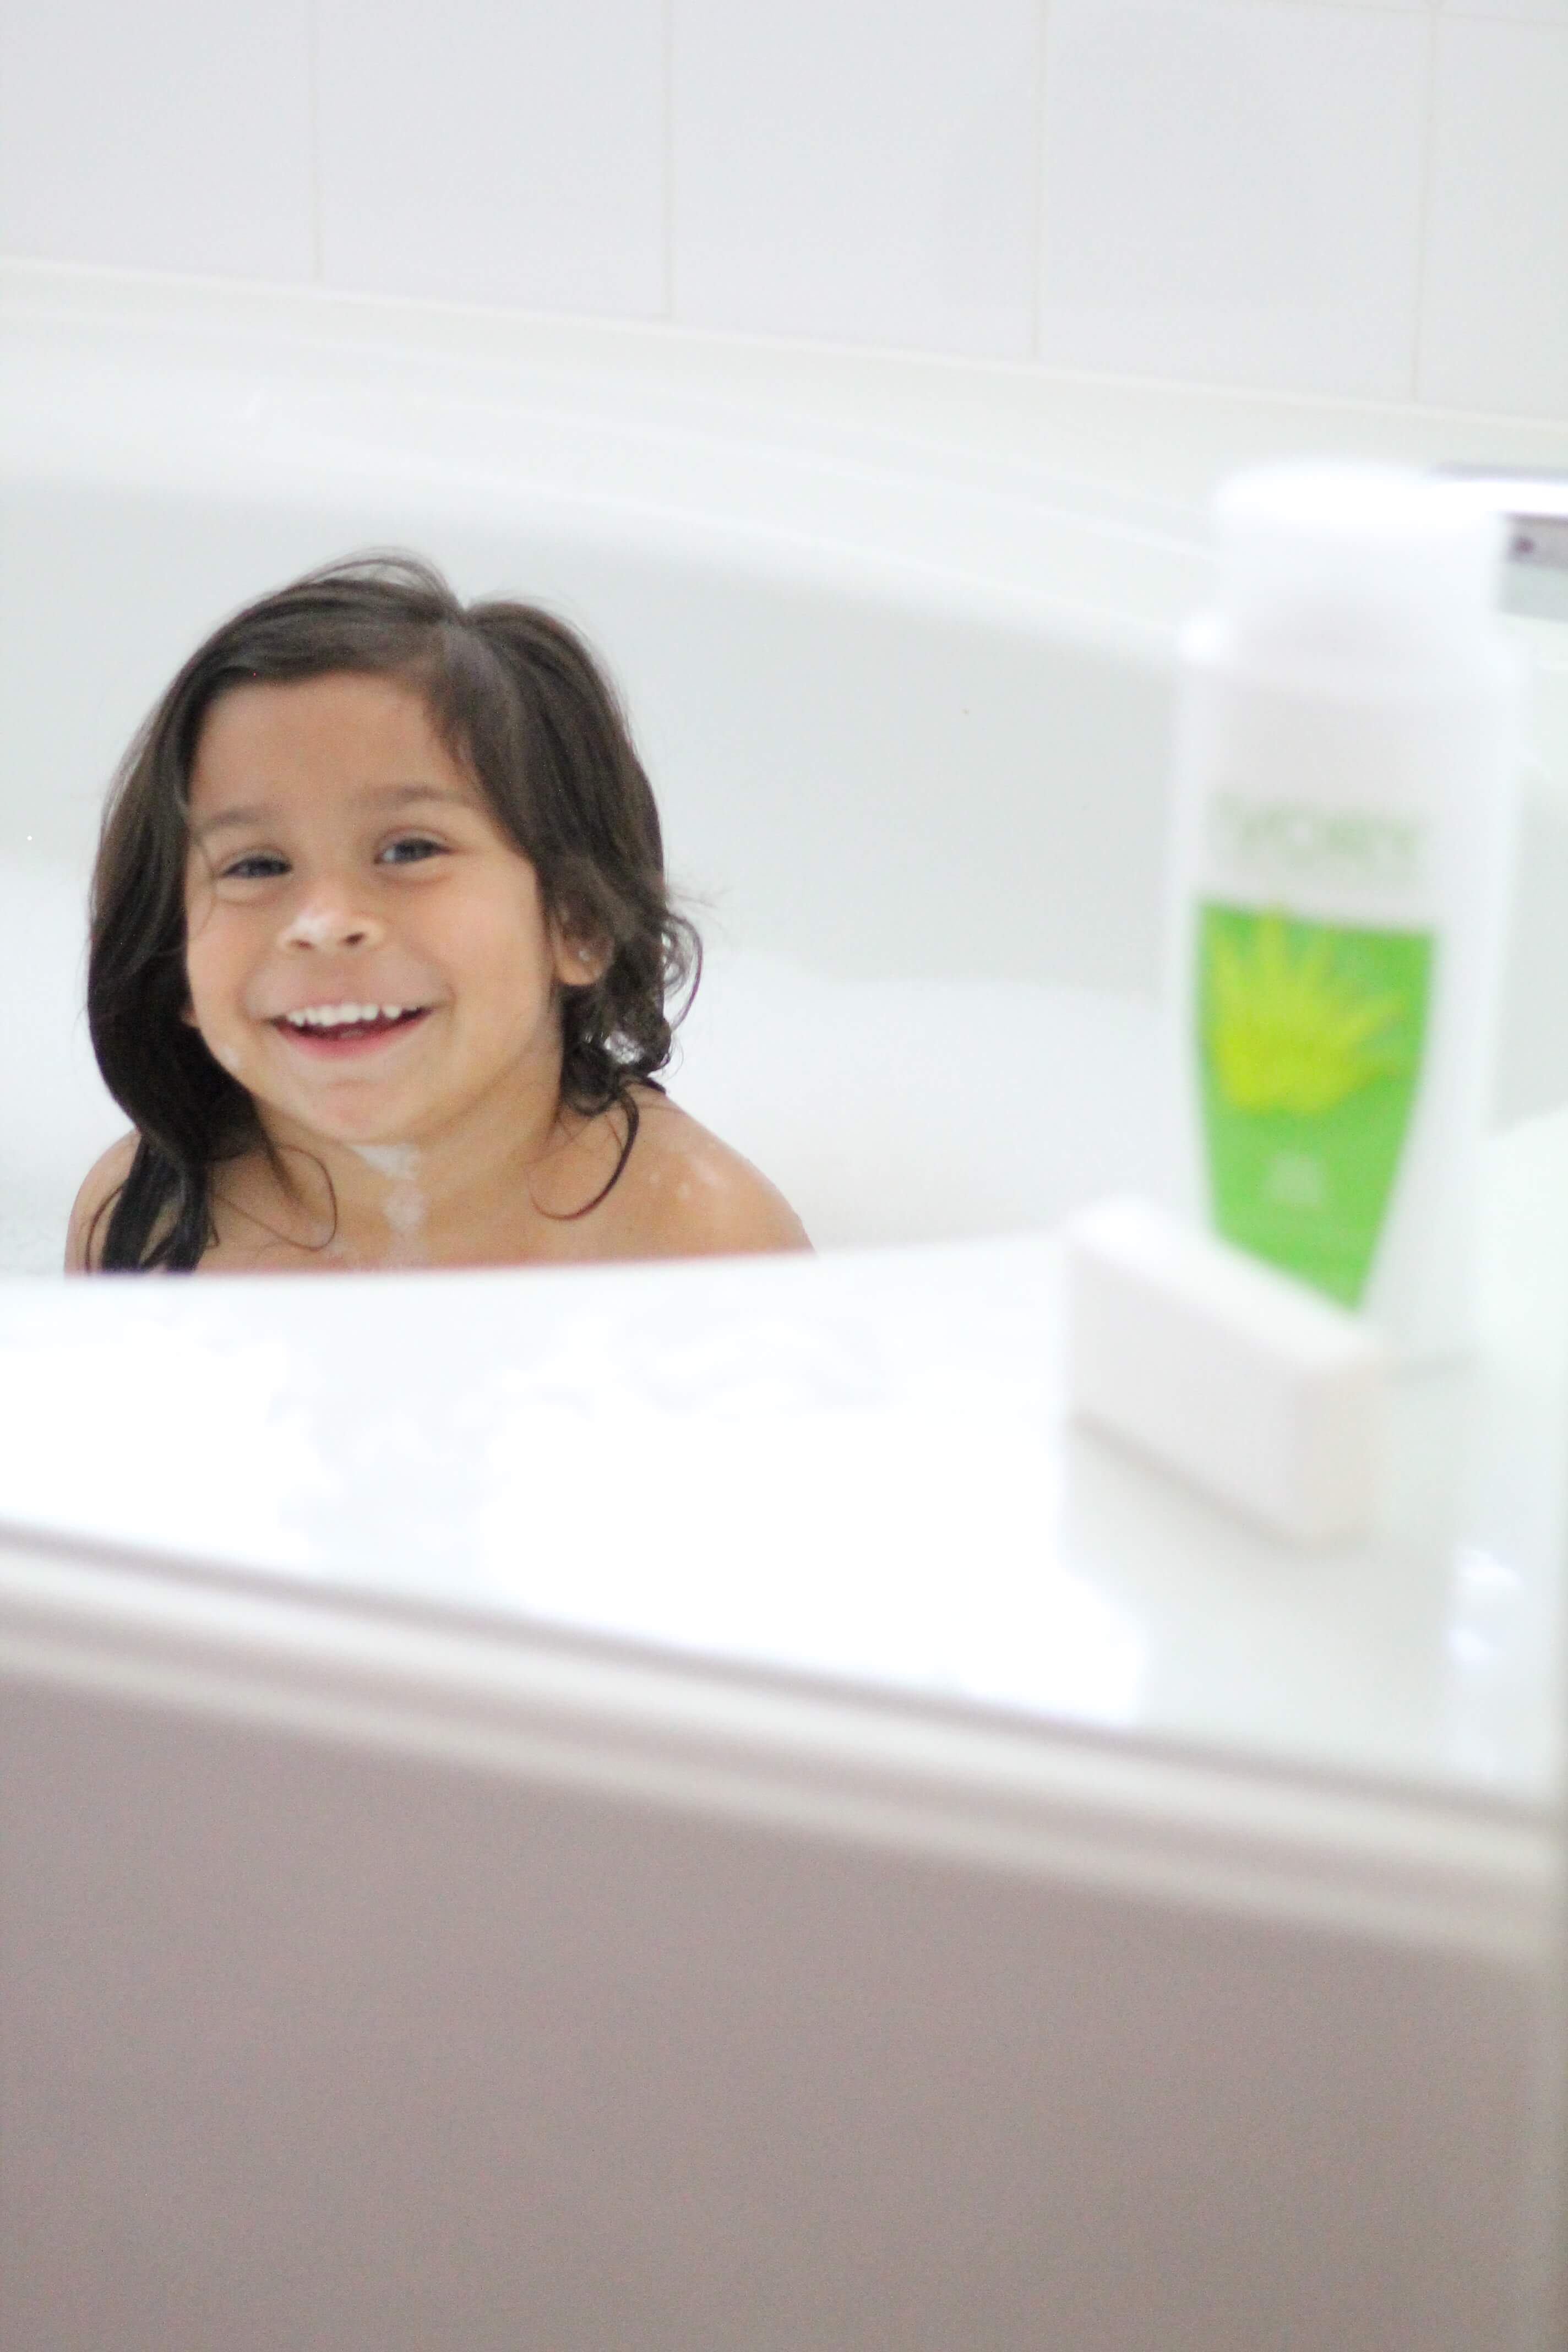 Bedtime routines with two kids: Bath time with @IvorySoap bubbles and snuggles with my my babes is part of it. #everydayivory #ad